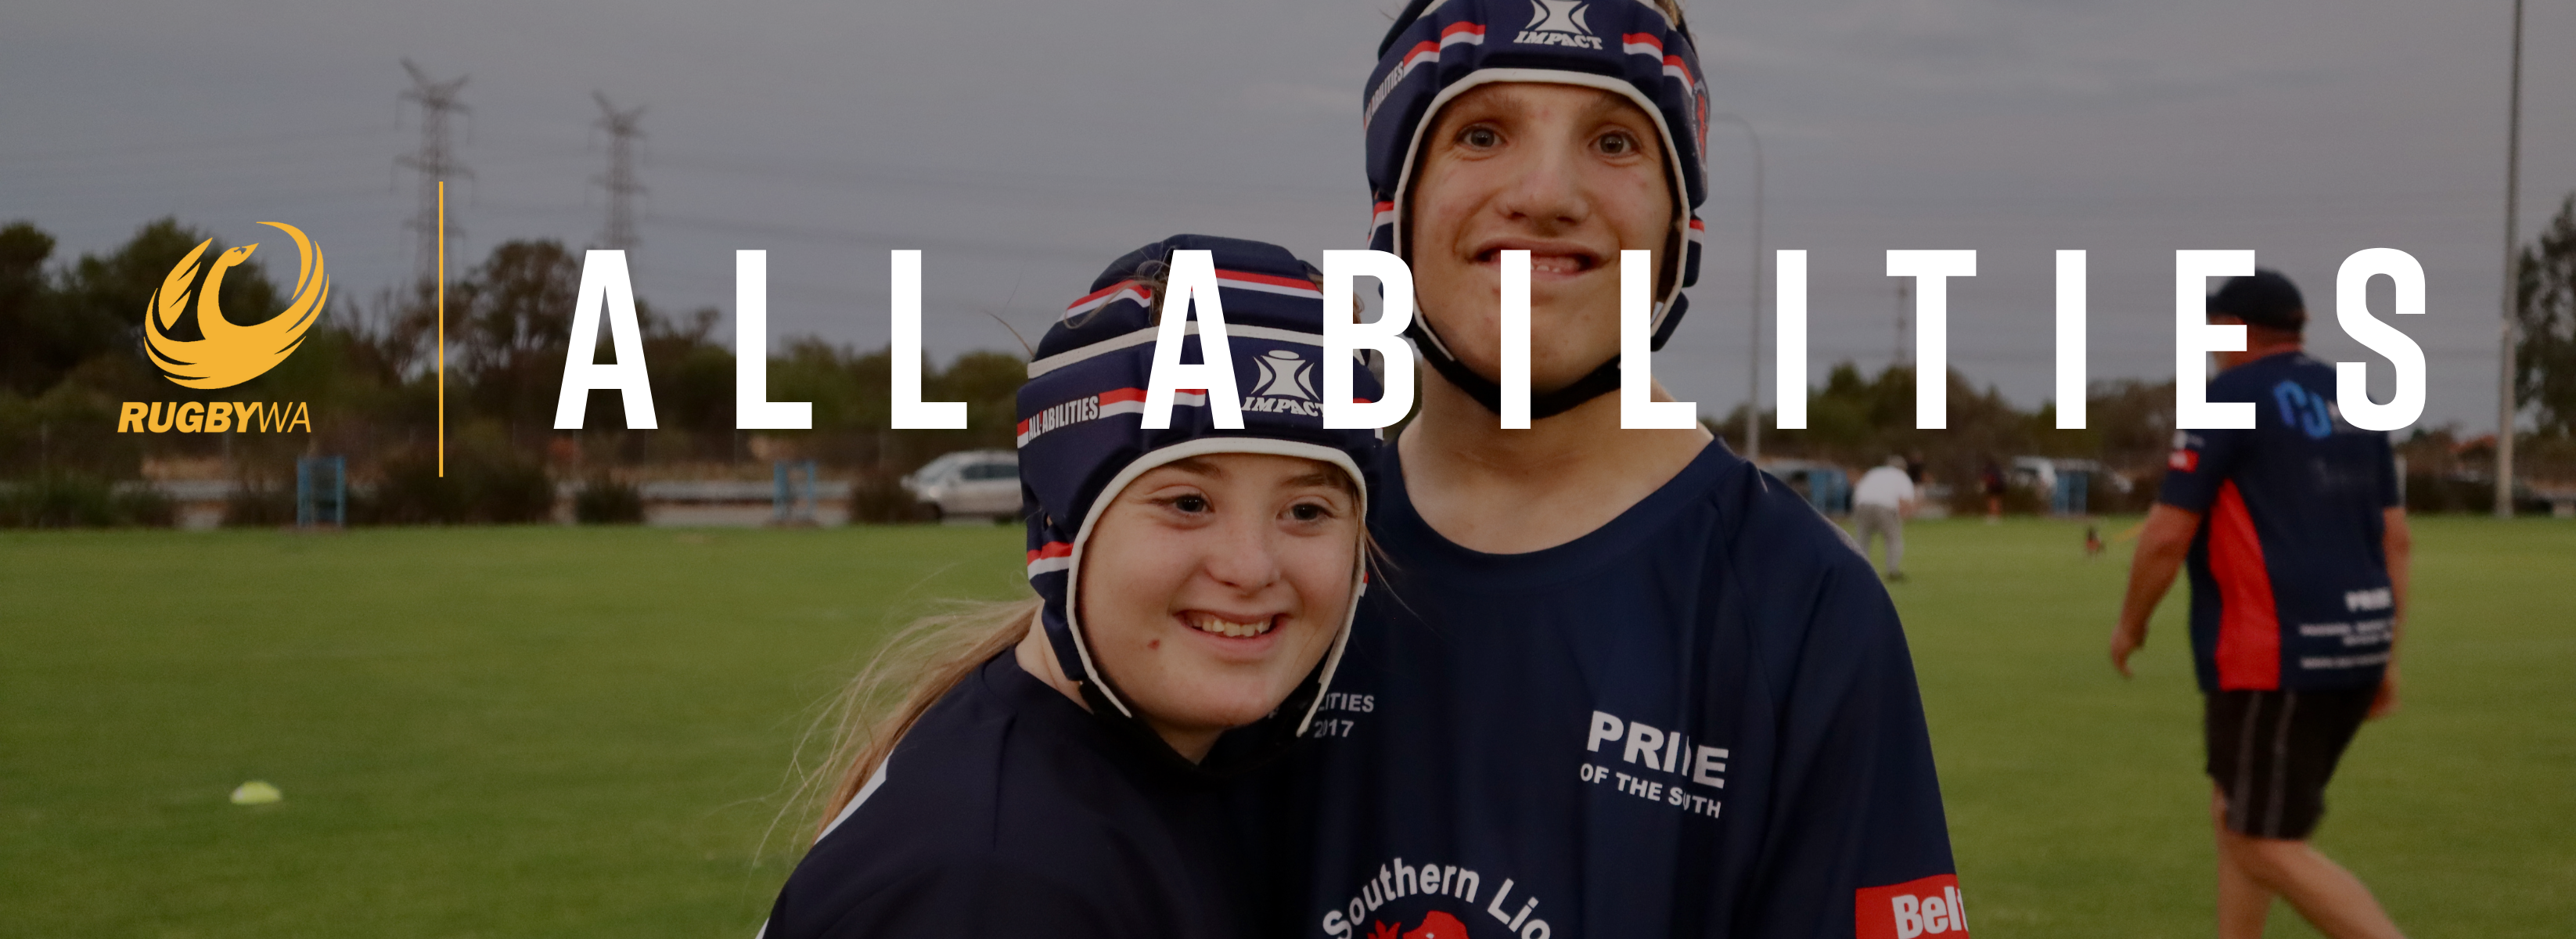 RugbyWA - All Abilities landing 